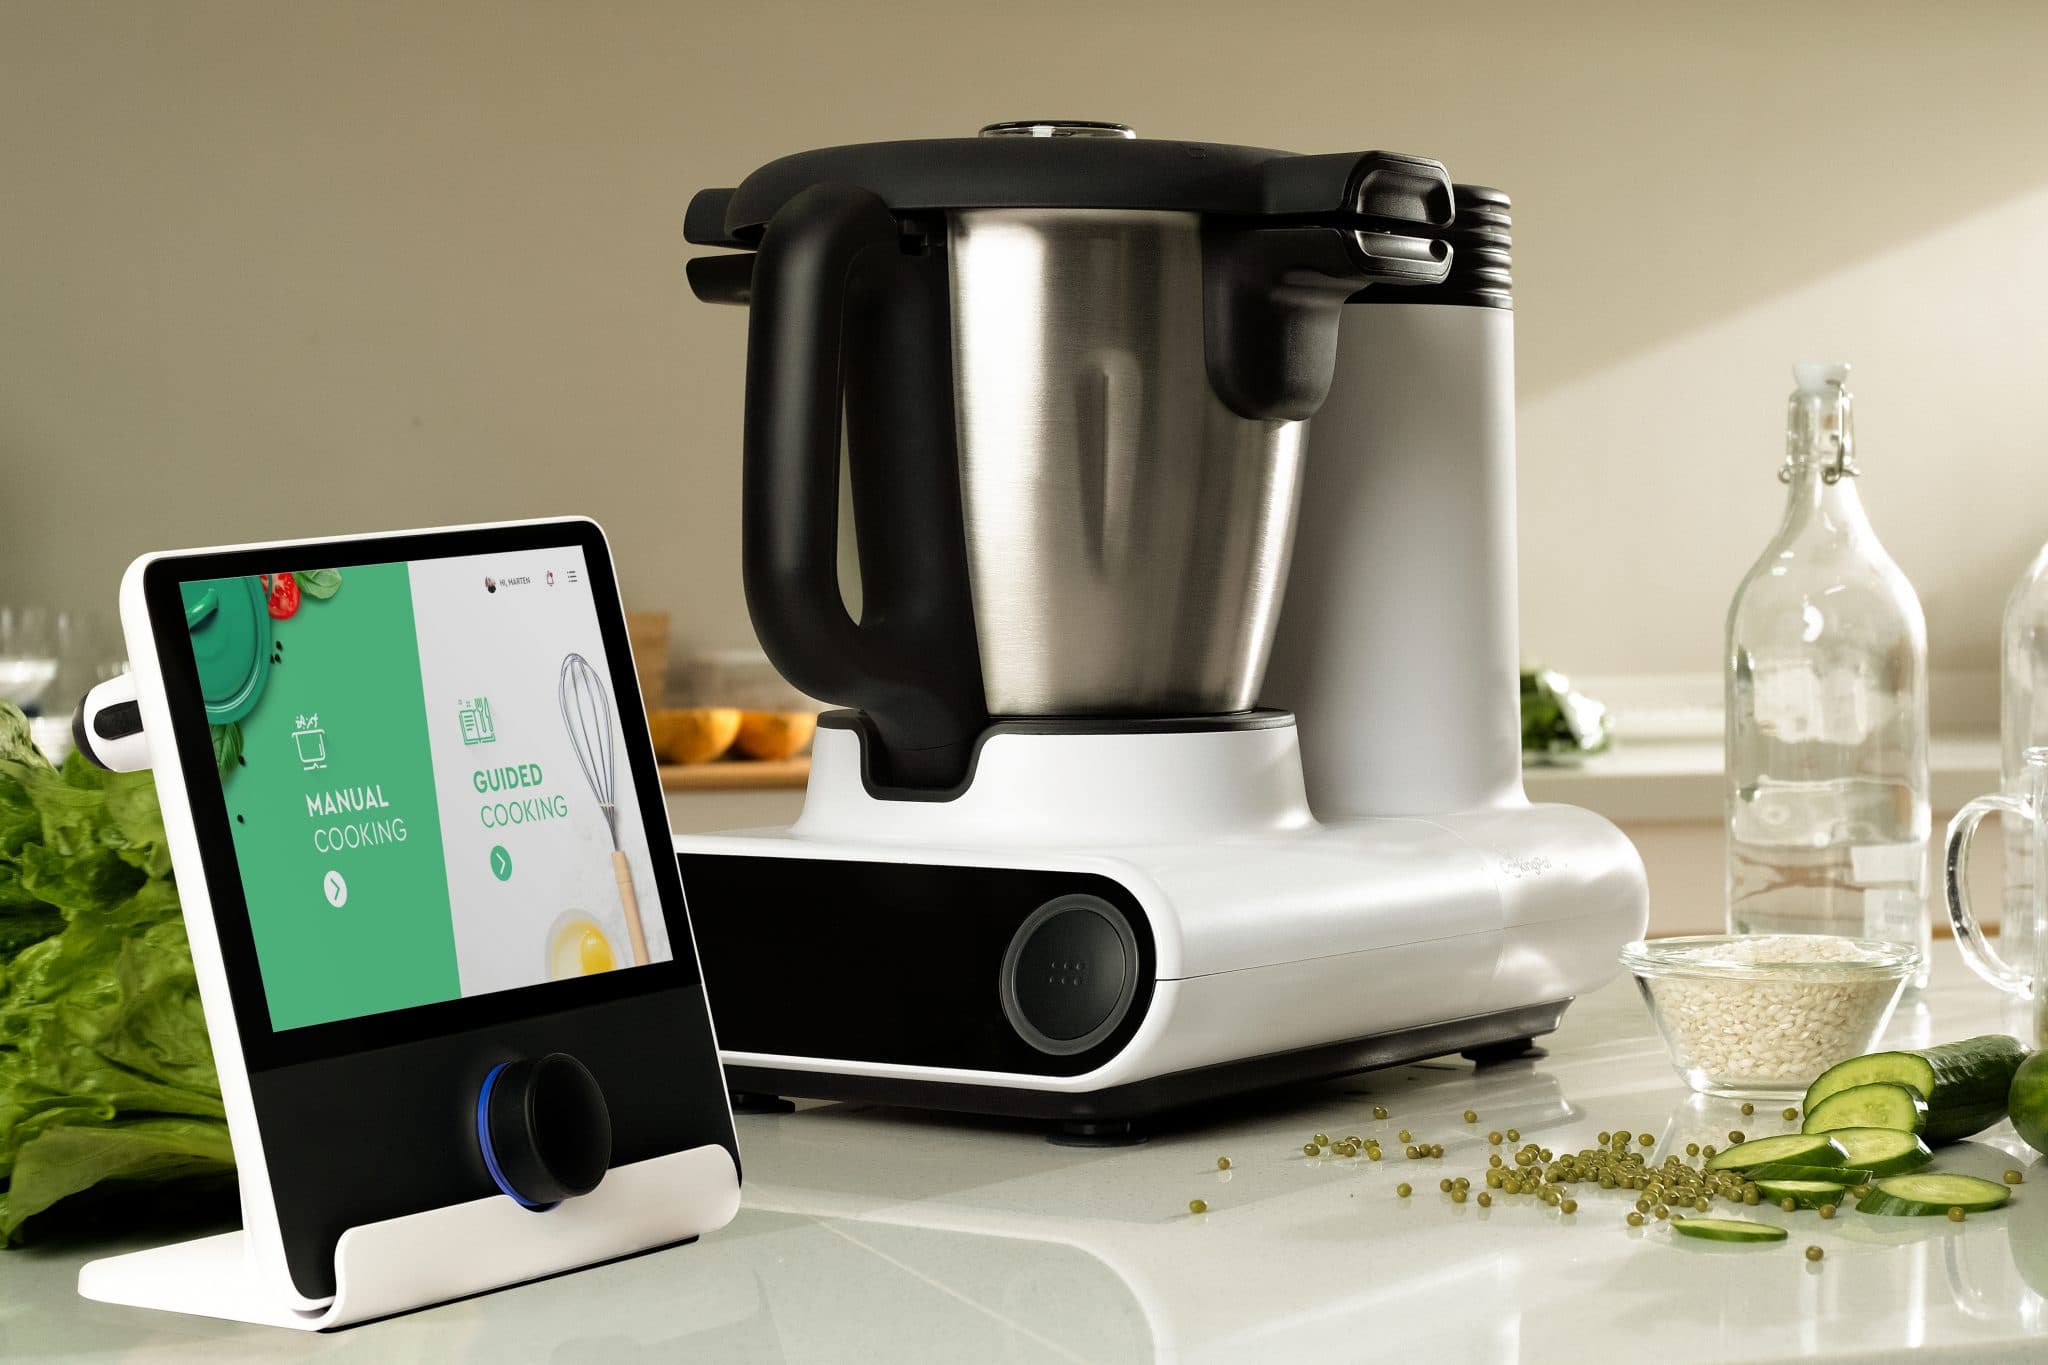 Julia is the autonomous cooking system we have been waiting for! CES 2020